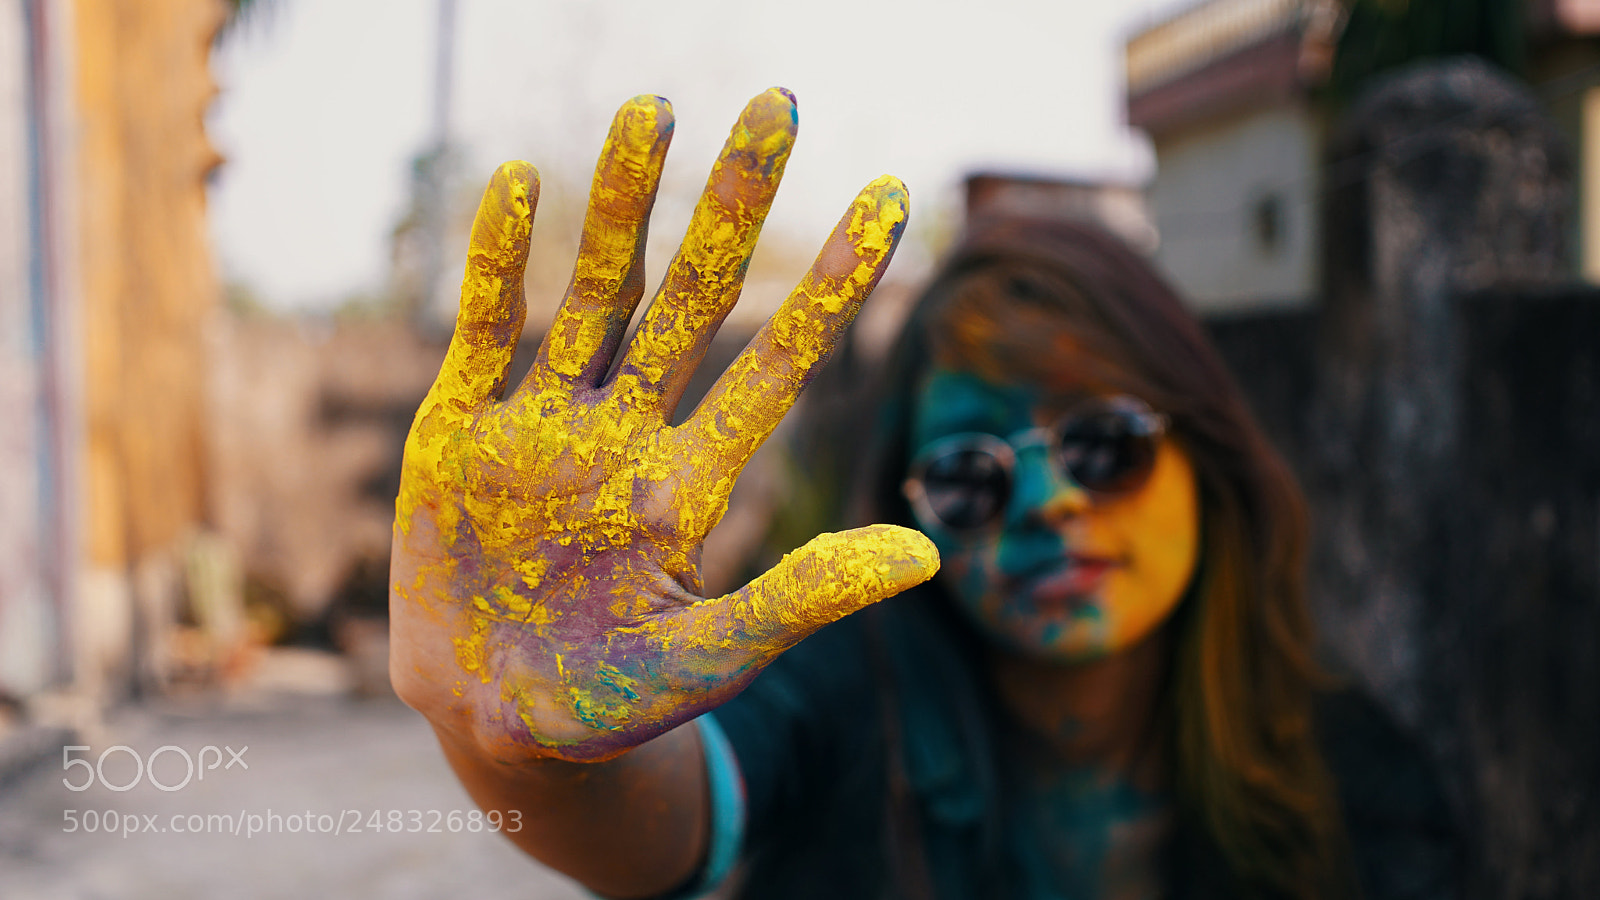 Sony a6300 sample photo. Festival of color photography